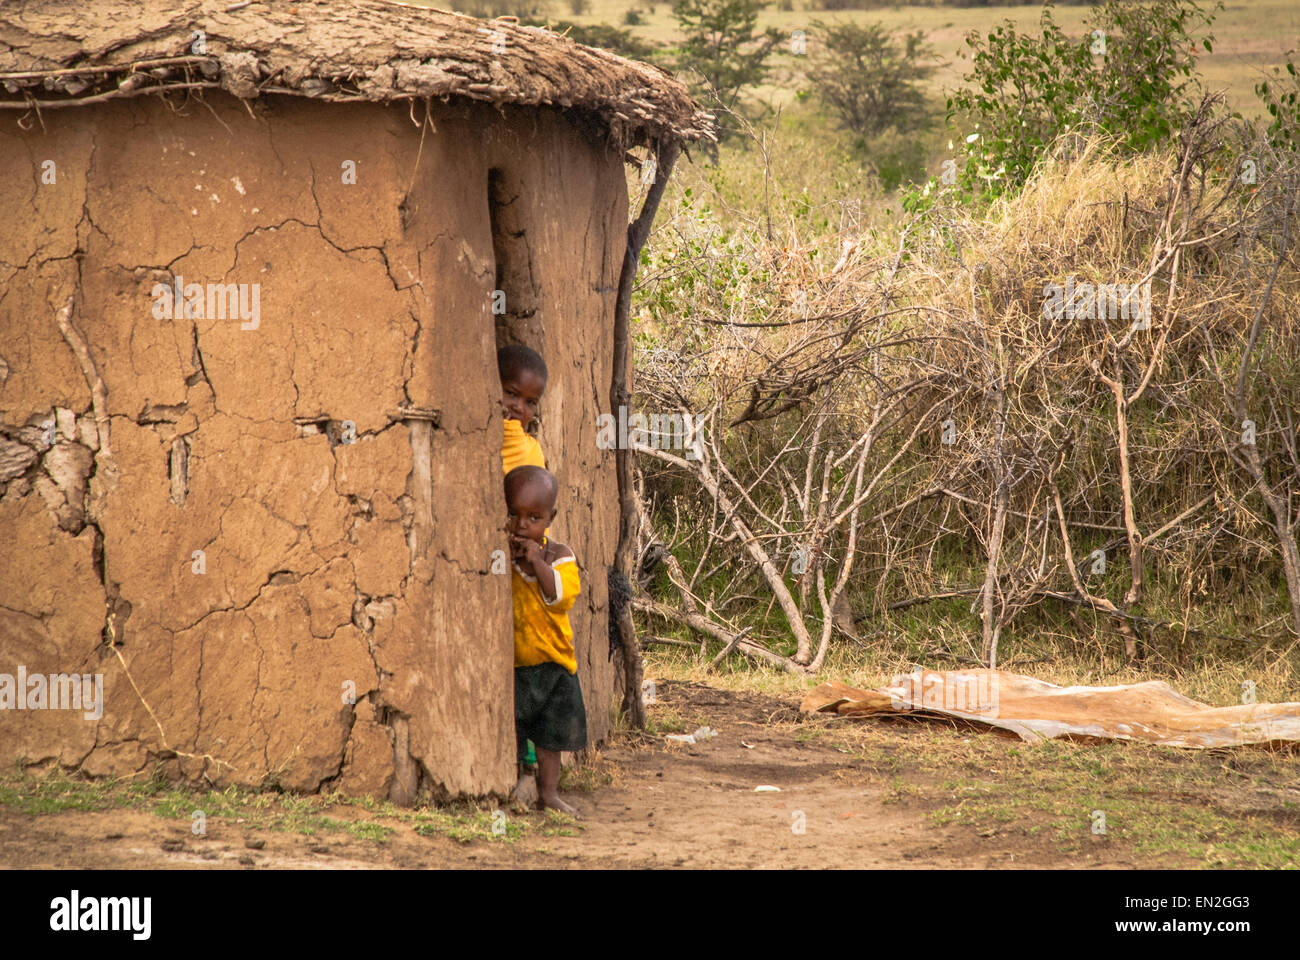 Two small Masai children peek out from a mud hut in a Masai Village. The huts form a kraal and is fenced by acacia thorn bushes. Stock Photo